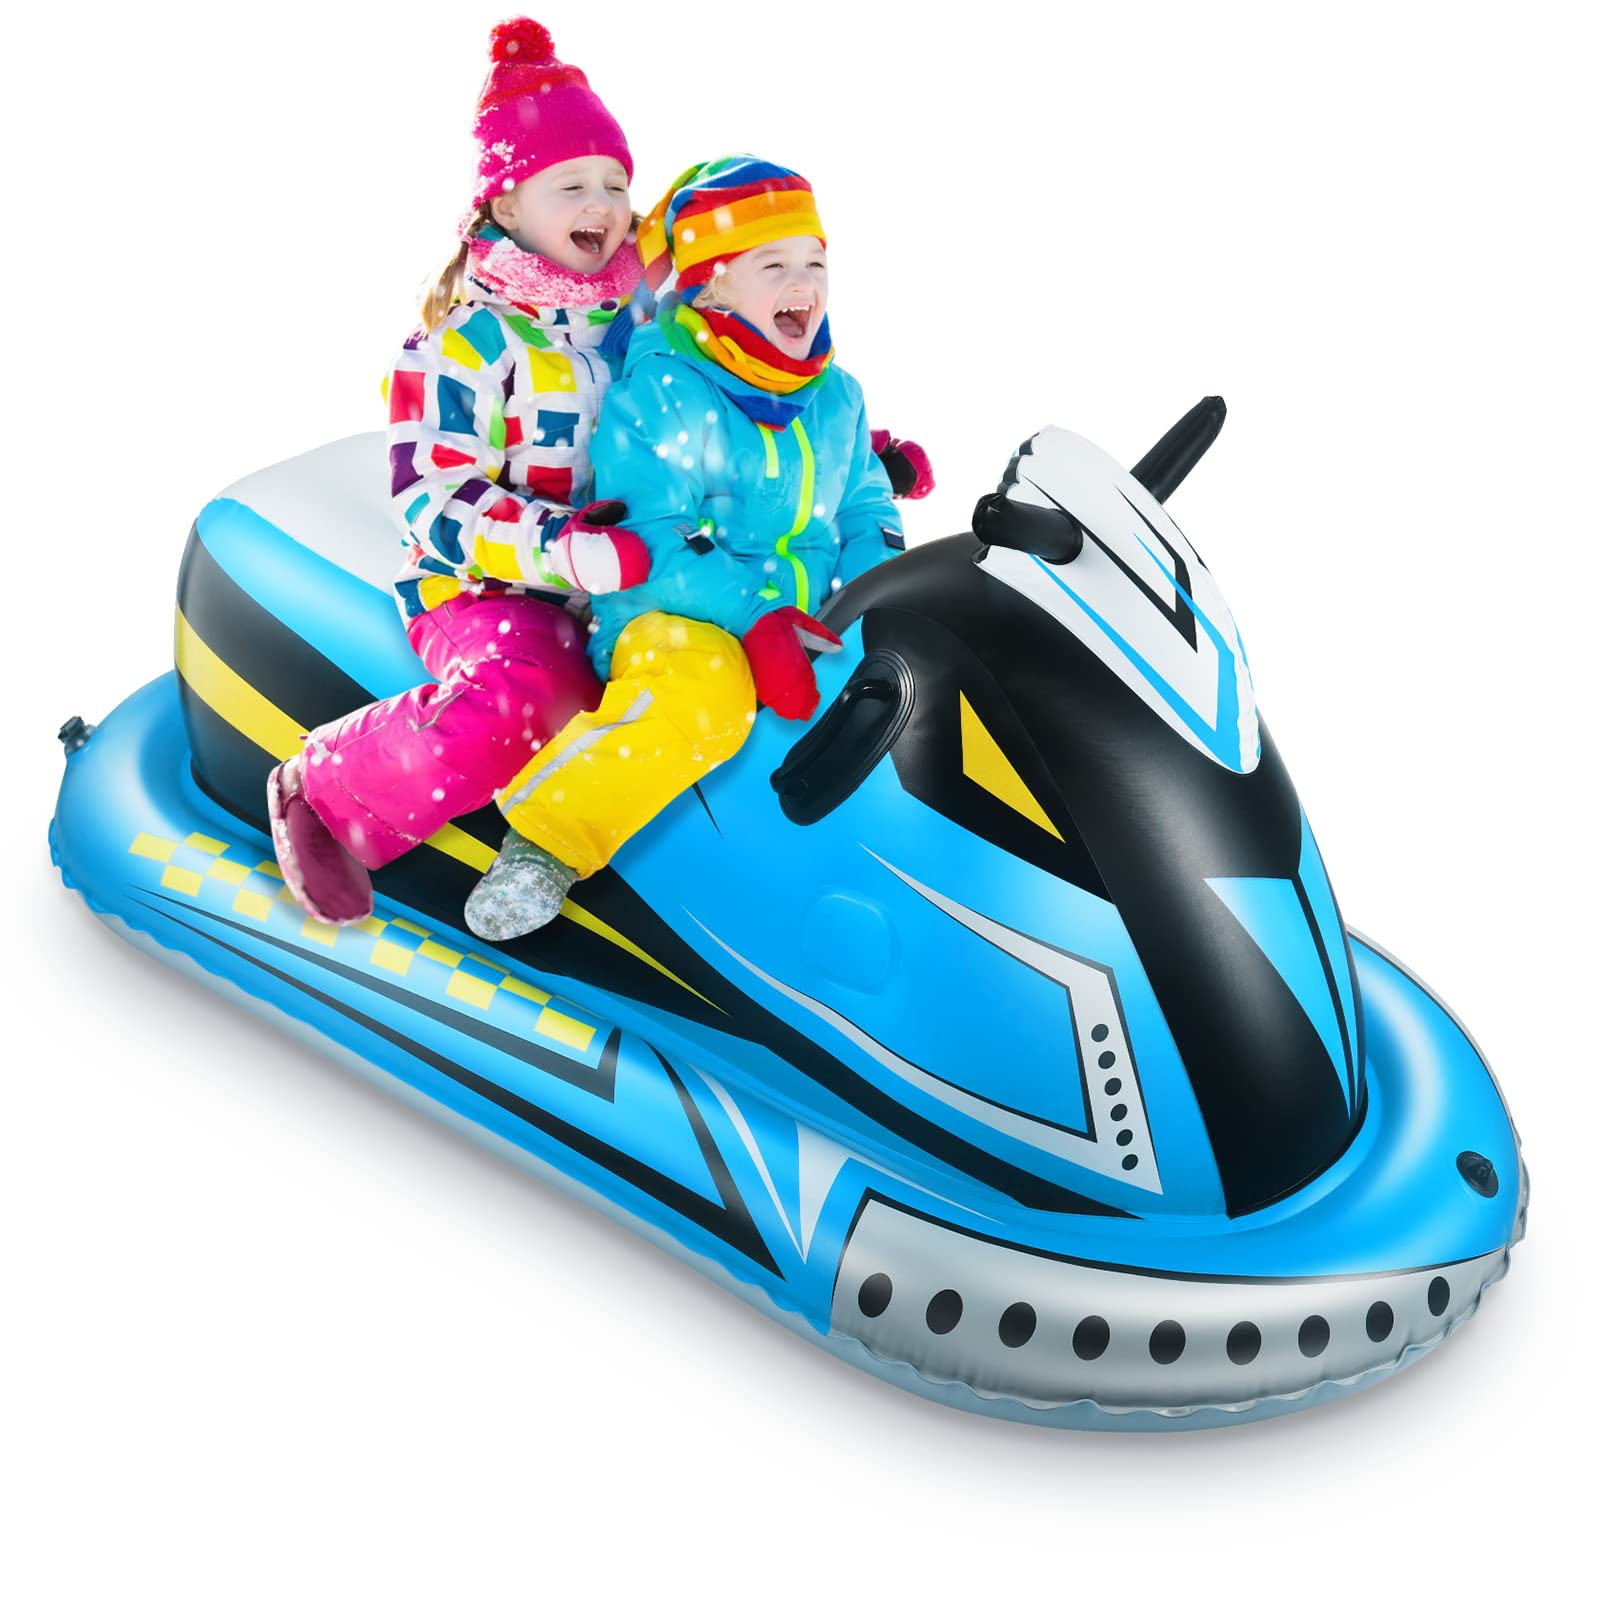 Inflatable Snow Sled for Kids and Adults, COKWEL Inflatable Sleds for Snow  for Toddlers Snow Tube for Sledding with Reinforced Handles Snow Rider Winter  Toys Ideal for Thanksgiving, Christmas